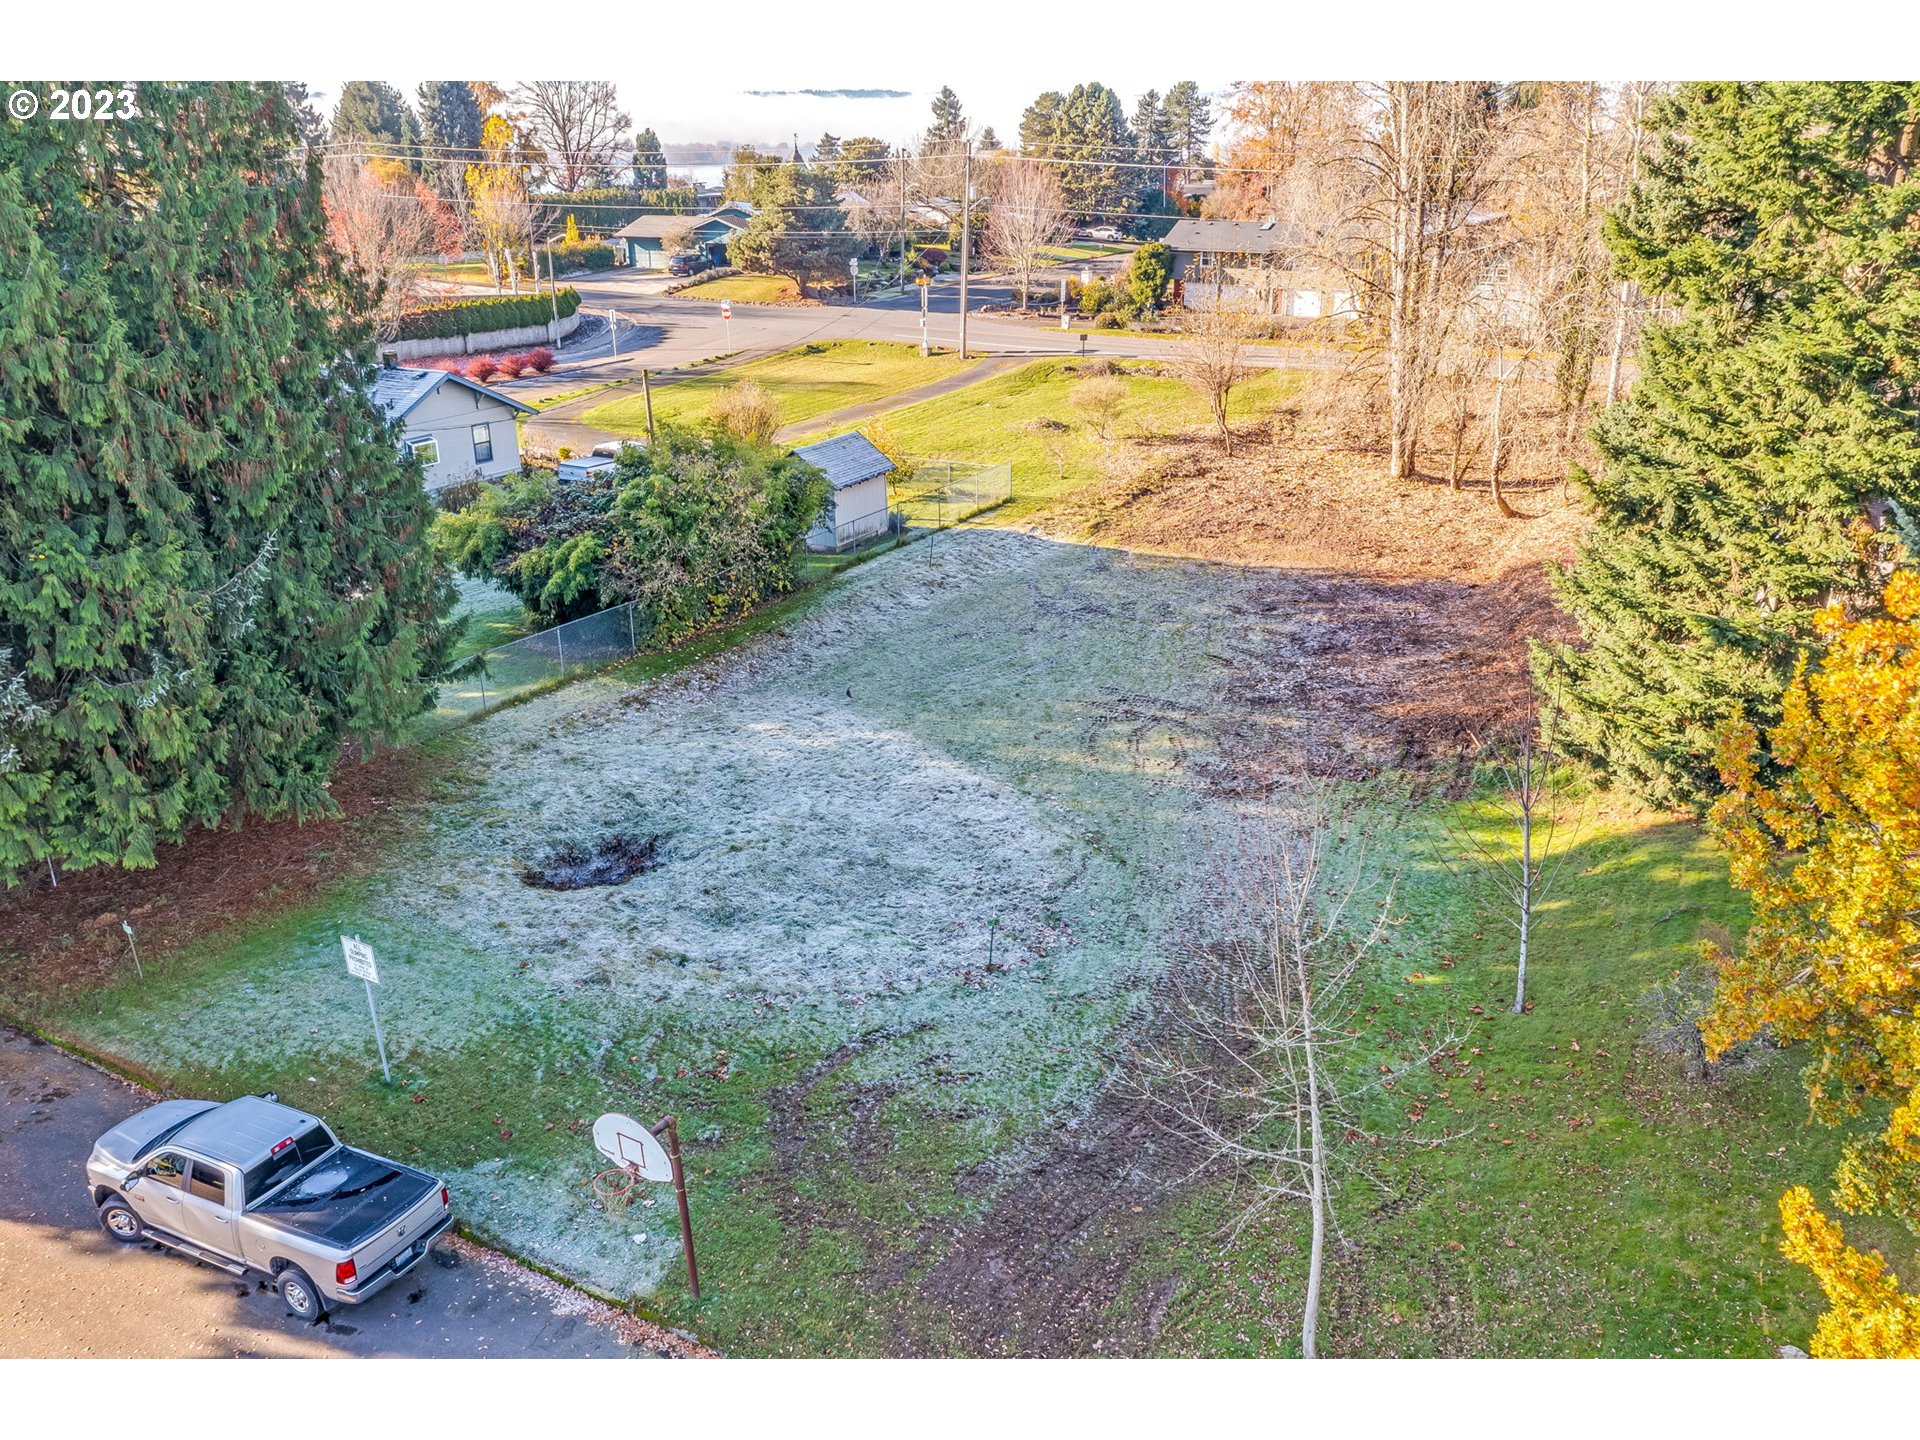 NW 20th Ave , Vancouver, WA 98665